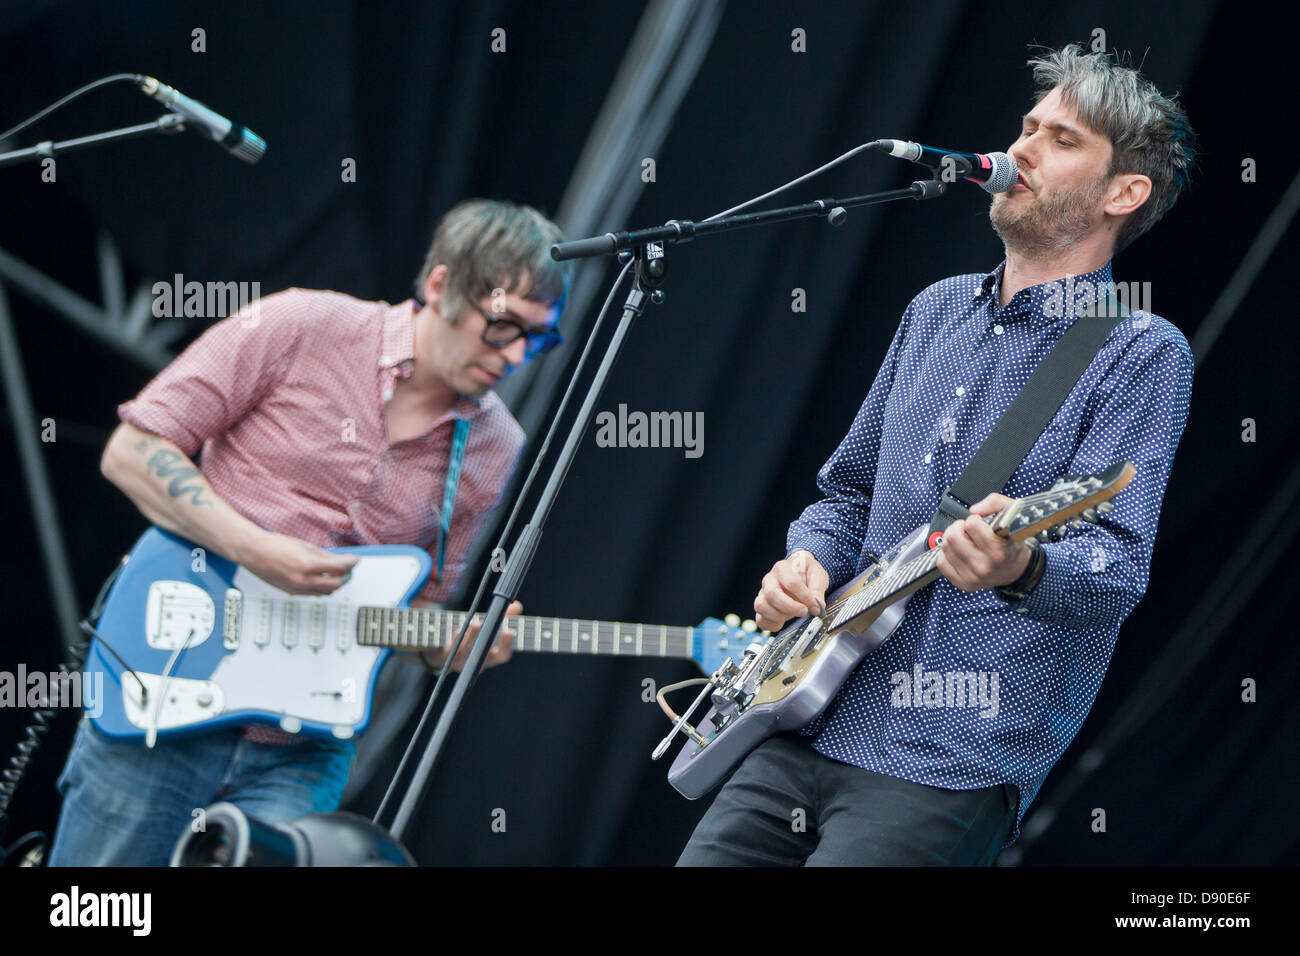 Nuremberg, Germany. 7th June 2013. Front man of German band Tocotronic, Dirk von Lowtzow, and guitarist Rick McPhail perform at the music festival 'Rock im Park' in Nuremberg, Germany, 07 June 2013. Over 70,000 rock musicians are expected to the festival which continues until 09 June. Photo: DANIEL KARMANN/dpa/Alamy Live News Stock Photo